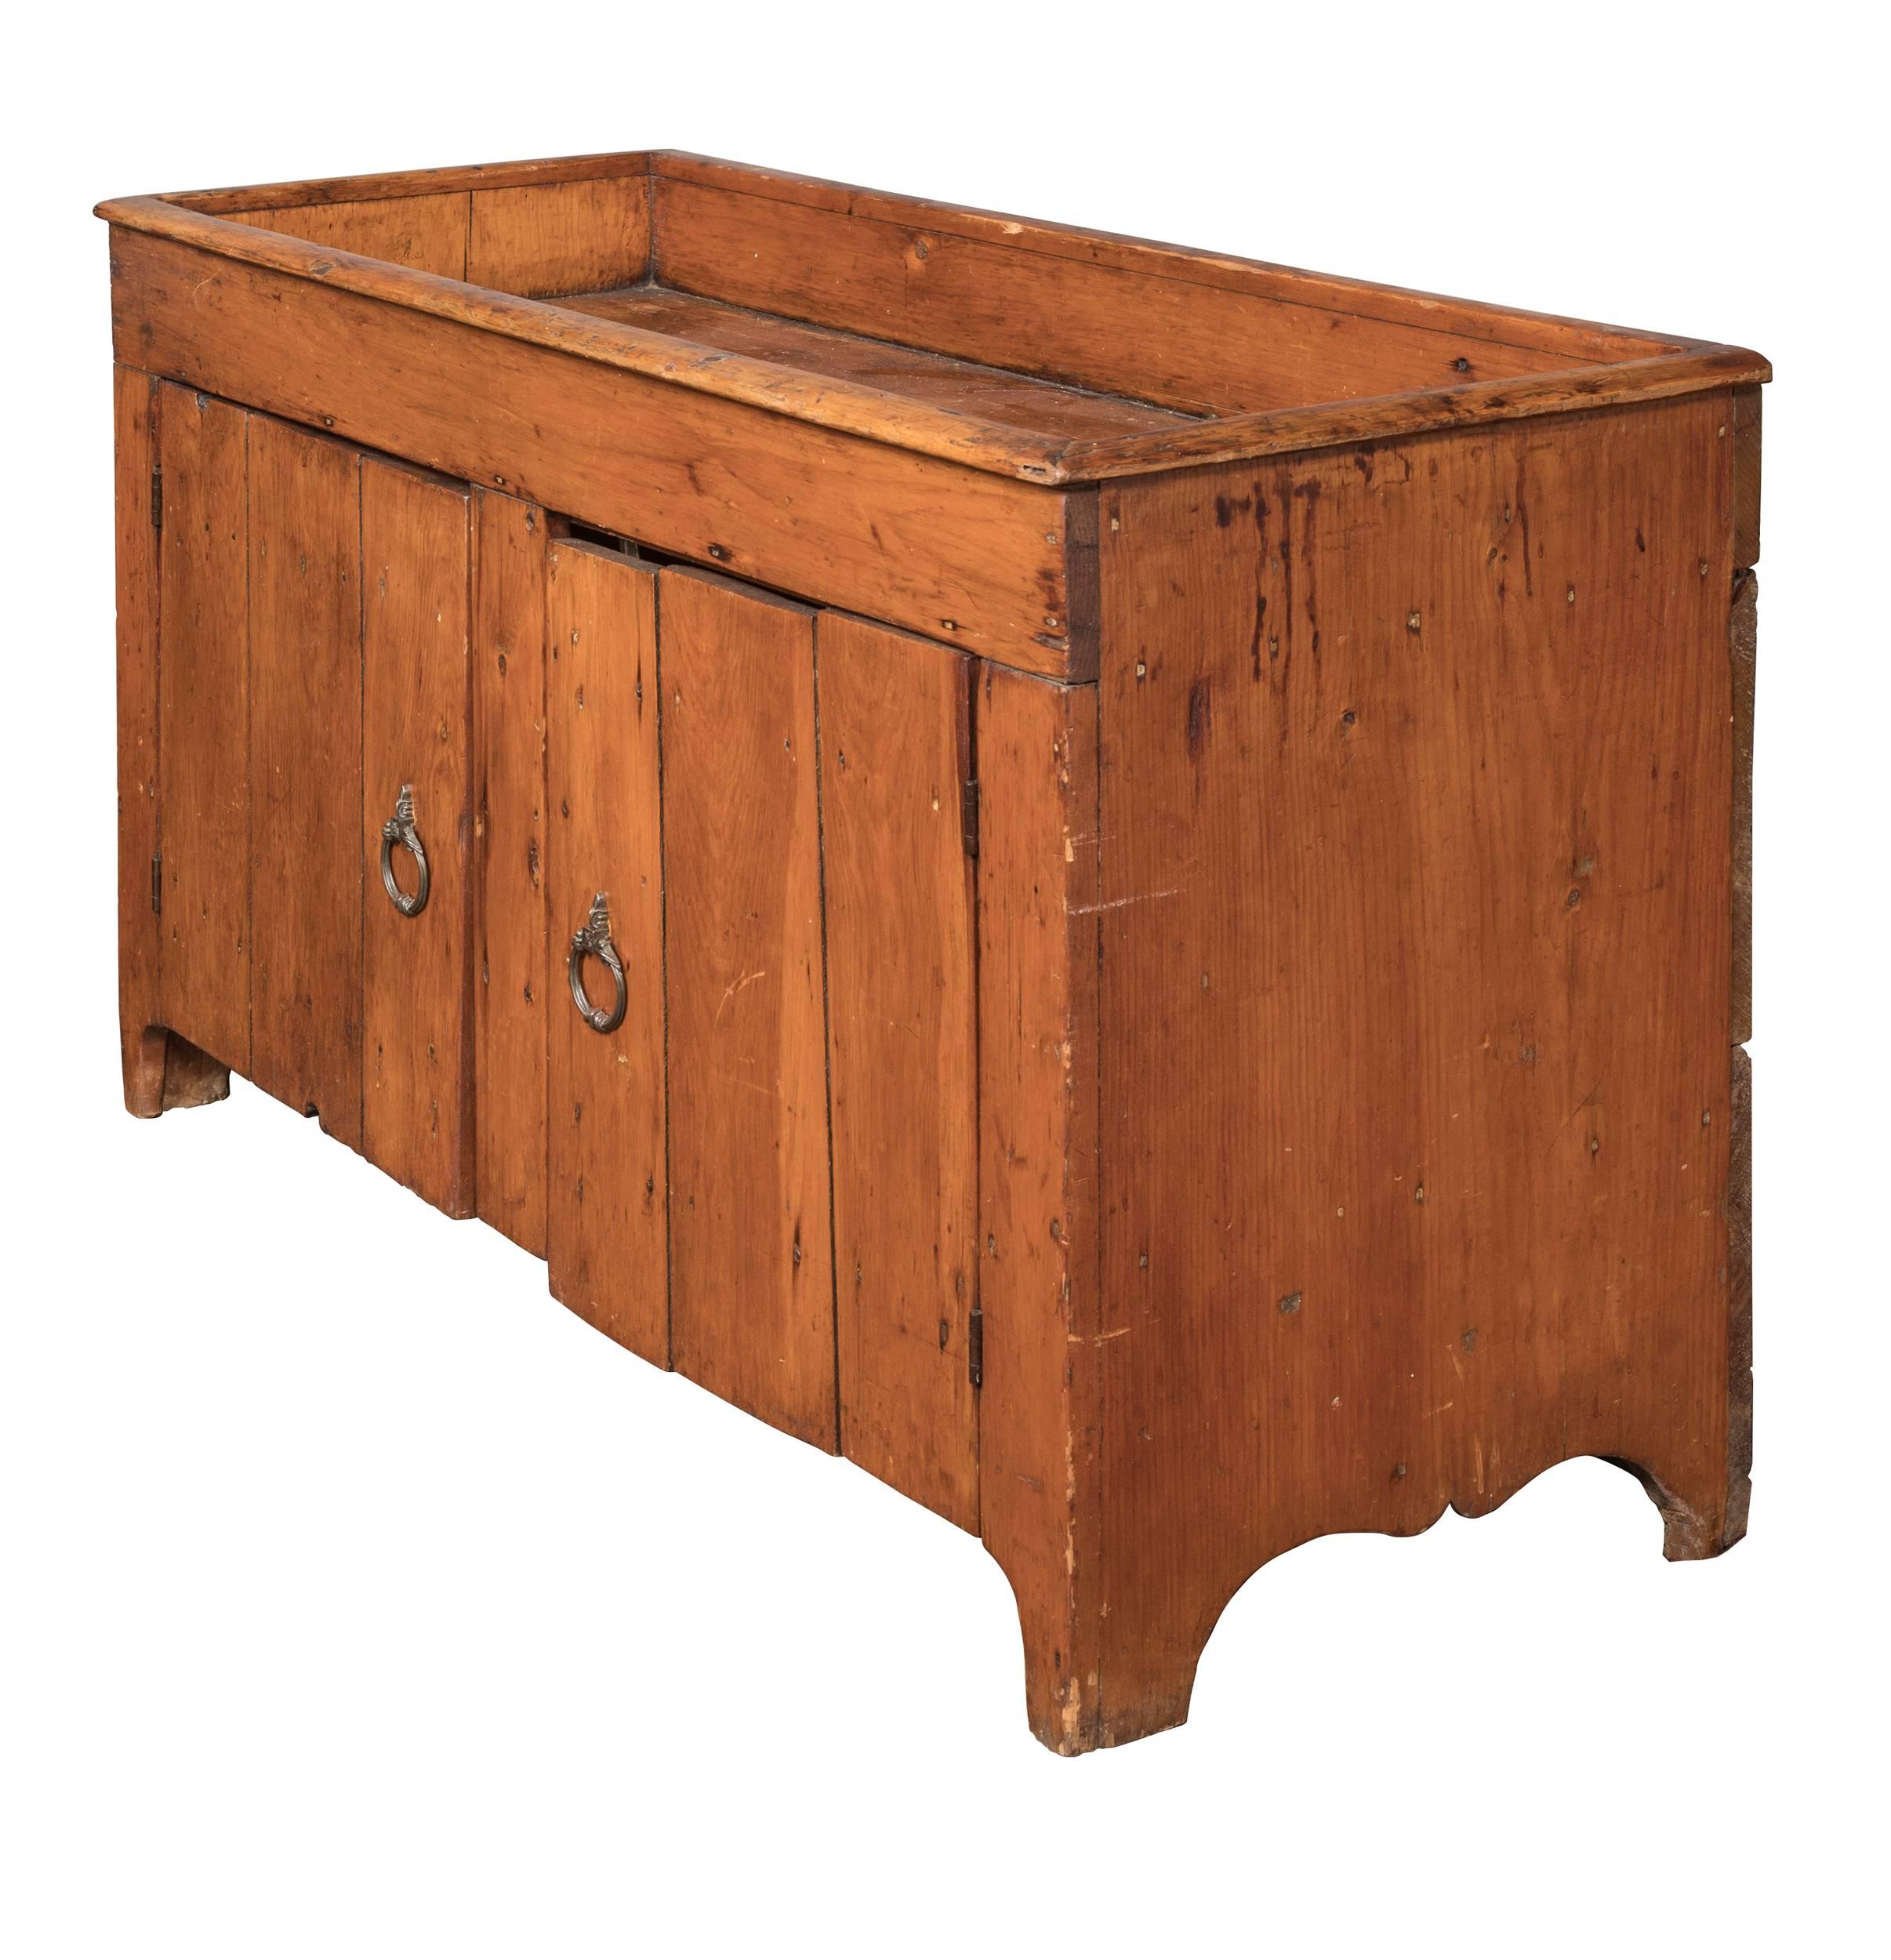 Very charming 19th century American dry sink. Pinewood is wonderfully patinated with age. Large sink area, cabinet space below with pair of grooved slat doors. It is in very sturdy condition.